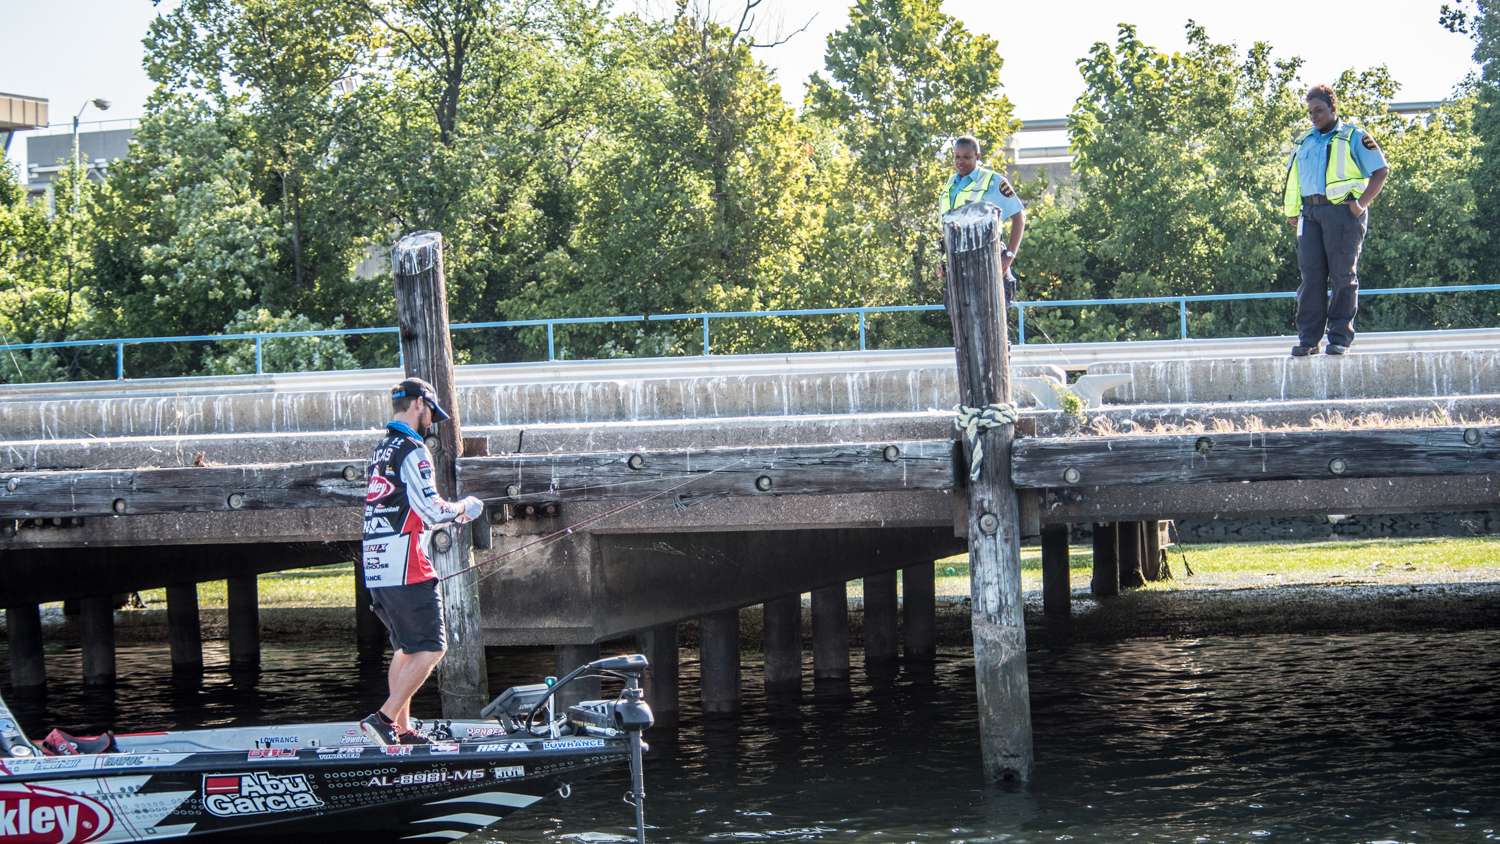 While security hovers overhead, Justin answers questions about fishing and how the tournament worksâ¦ just another example of how accommodating, accessible and professional the Bassmaster Elite Series anglers are.  